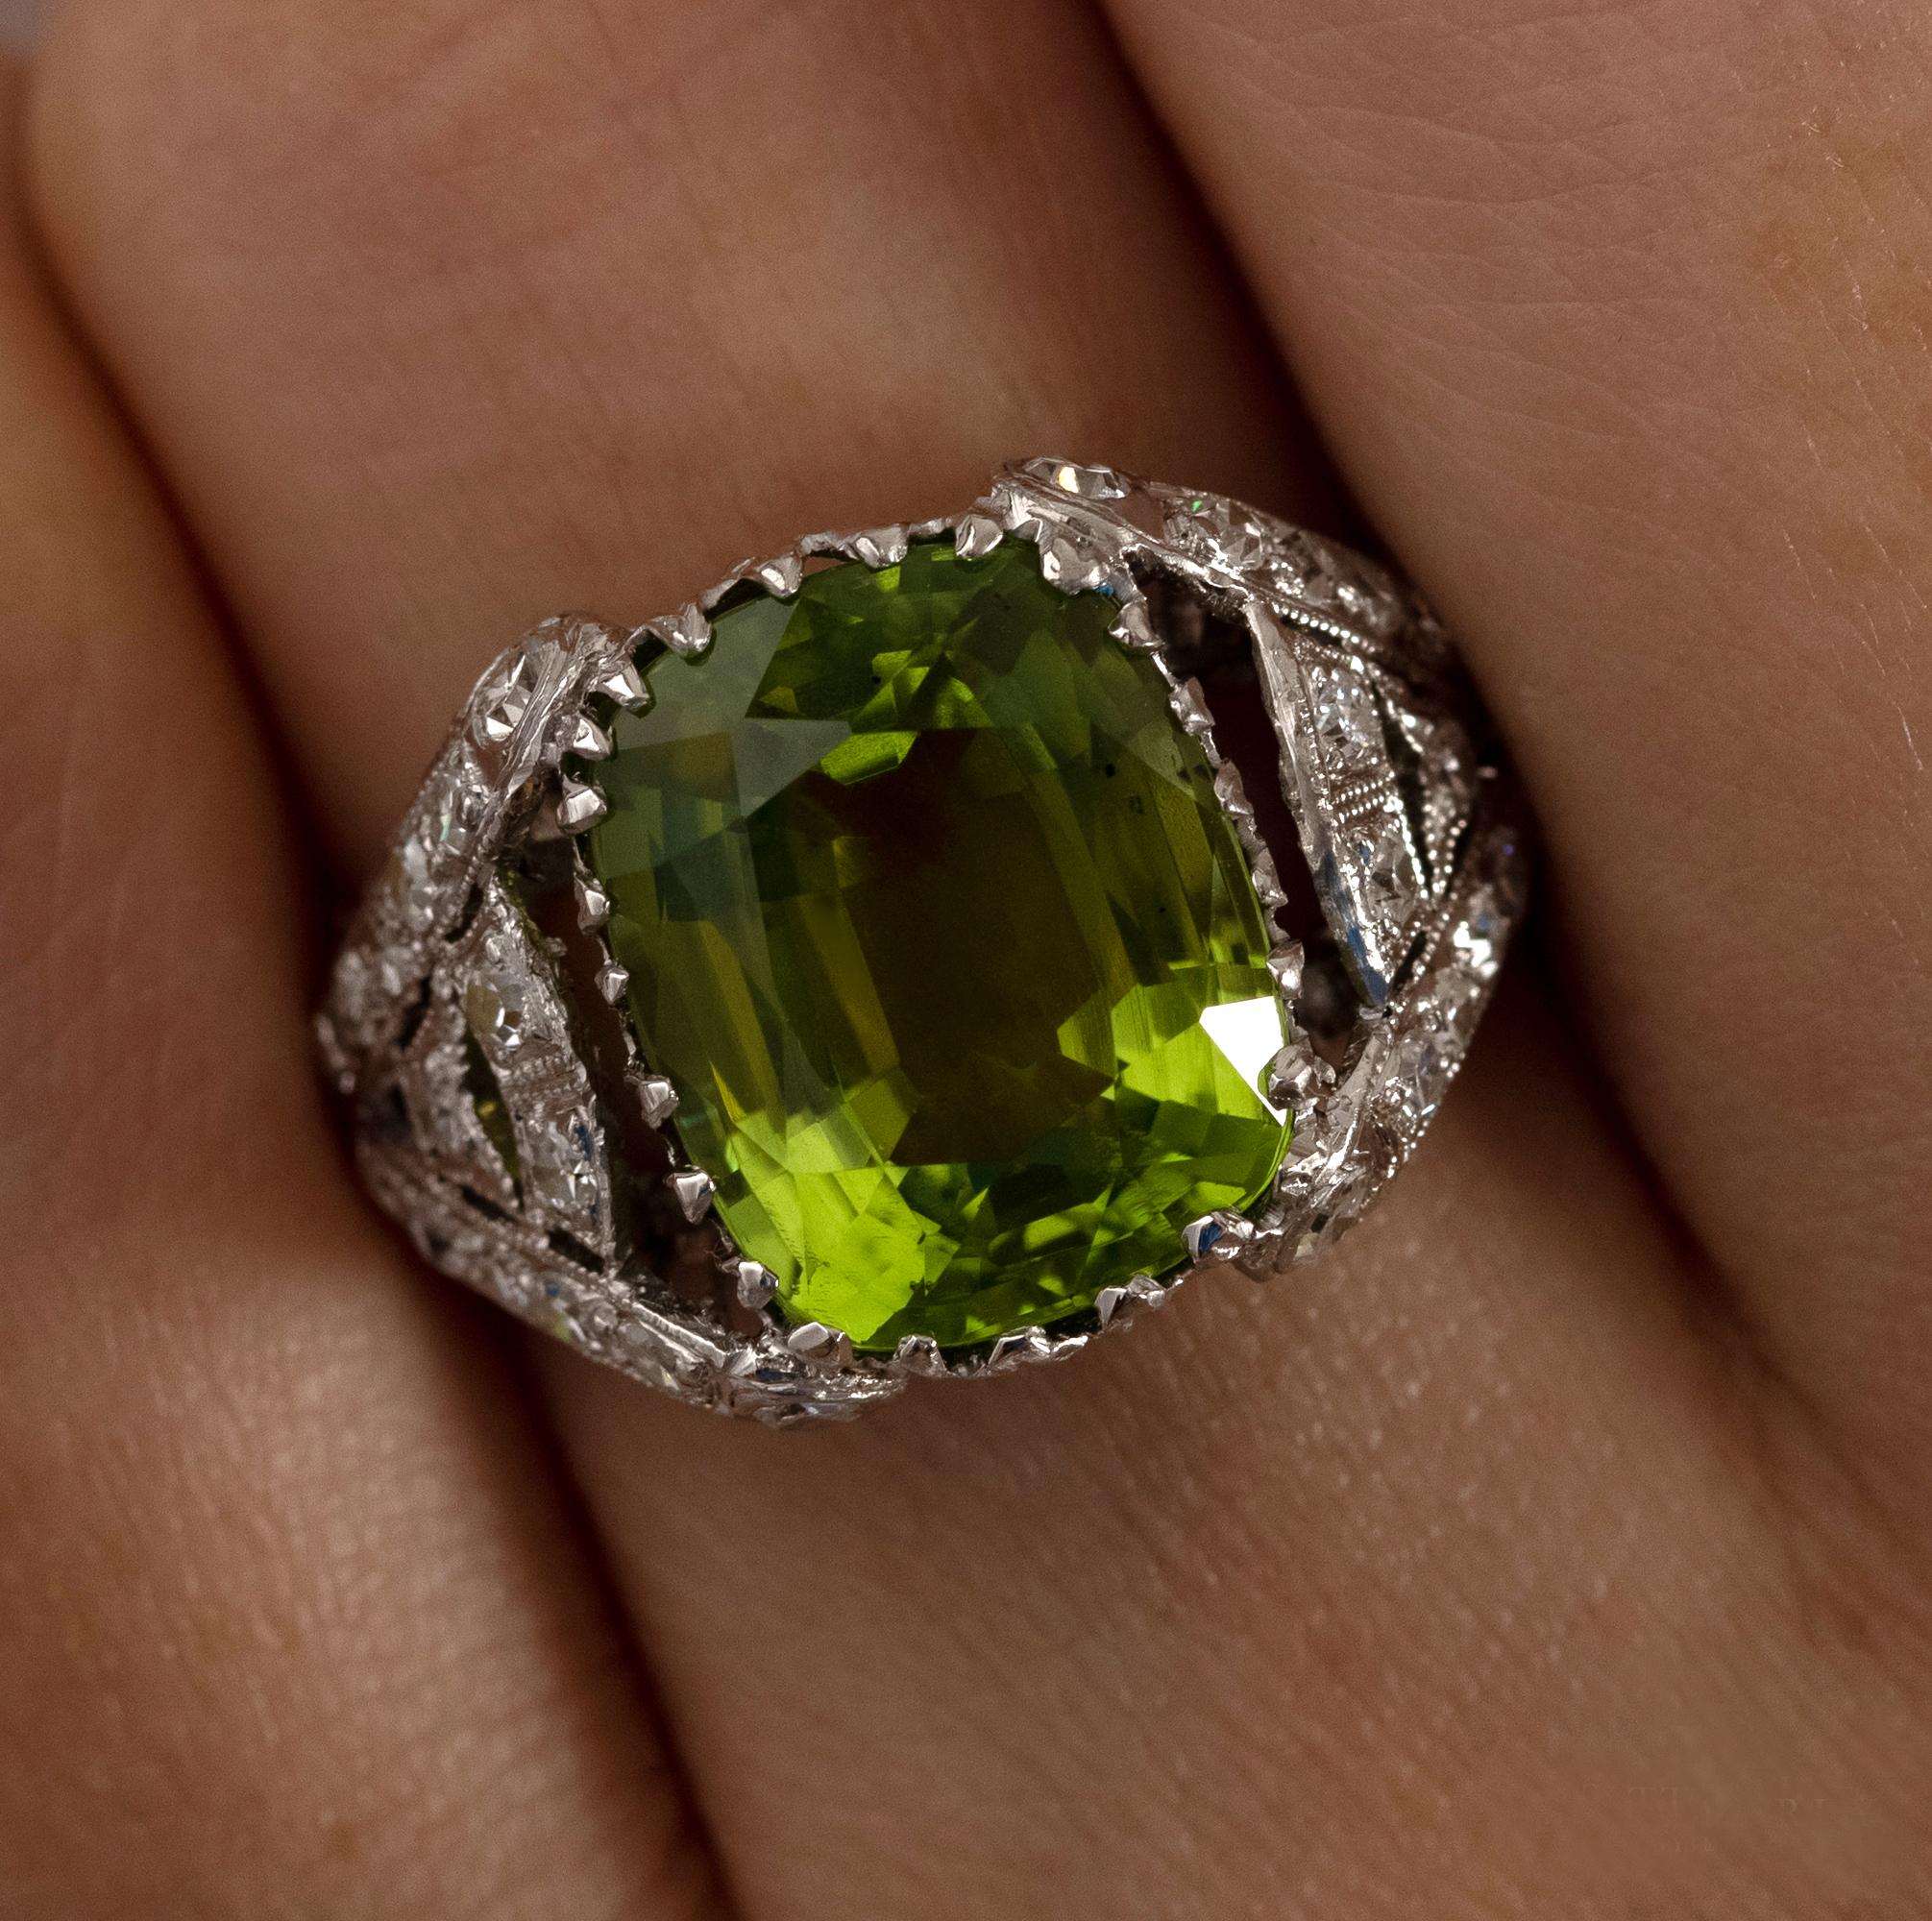 Antique GIA 6.73ct Old Cushion Peridot and Diamond Edwardian Platinum Ring.
From the mid-1800s, Peridot was a favored stone in jewelry, reaching the height of its popularity during the aesthetic period of the Victorian era and the reign of Edward